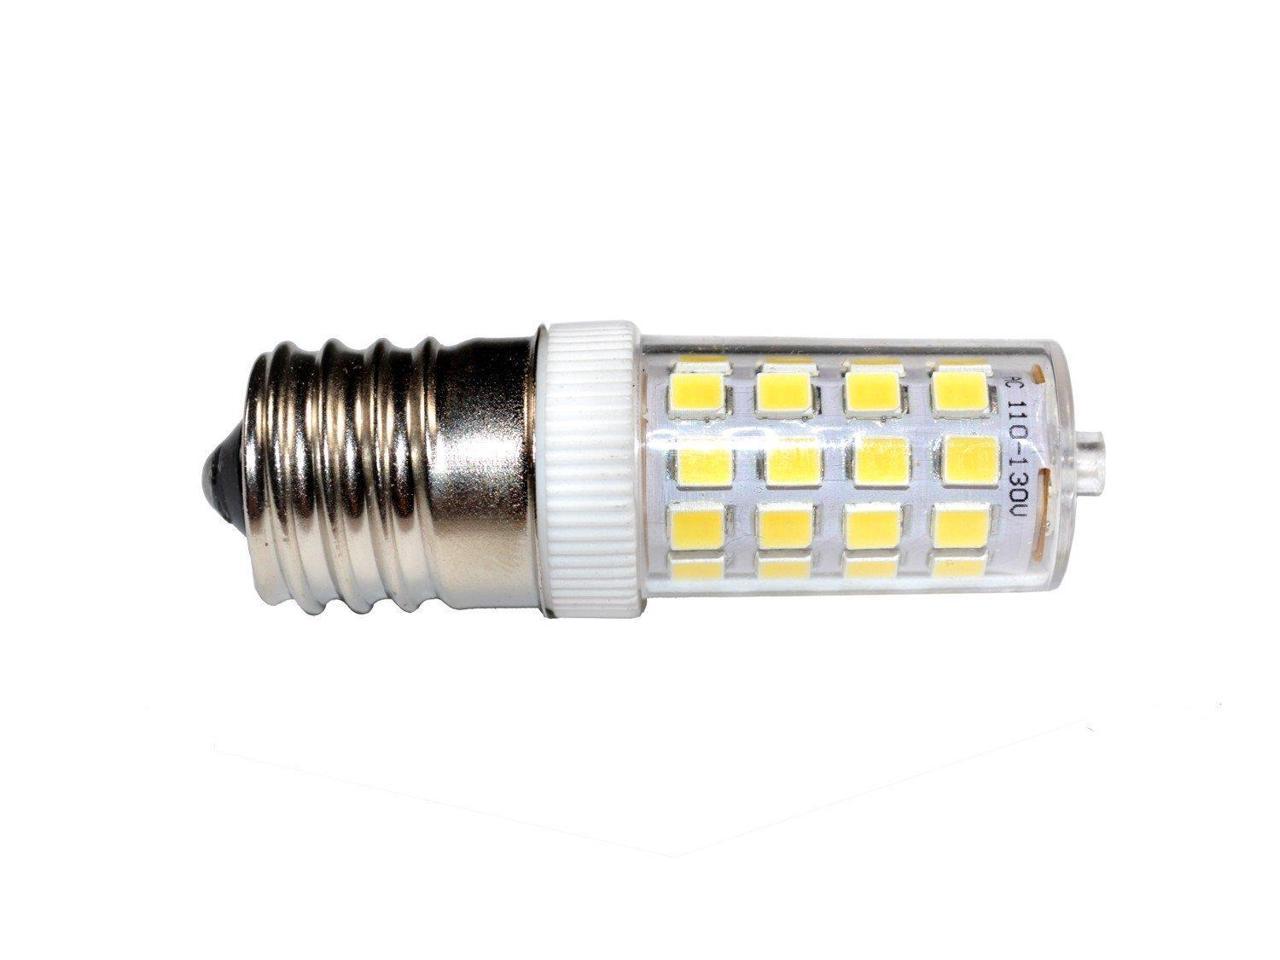 E17 5/8 Base Microwave Exterior Light Bulb for Stove Cool White - 2 Piece Sewing Machine Compatible with Whirlpool GE Kenmore LG 8206232A 5W Appliance LED Bulb 